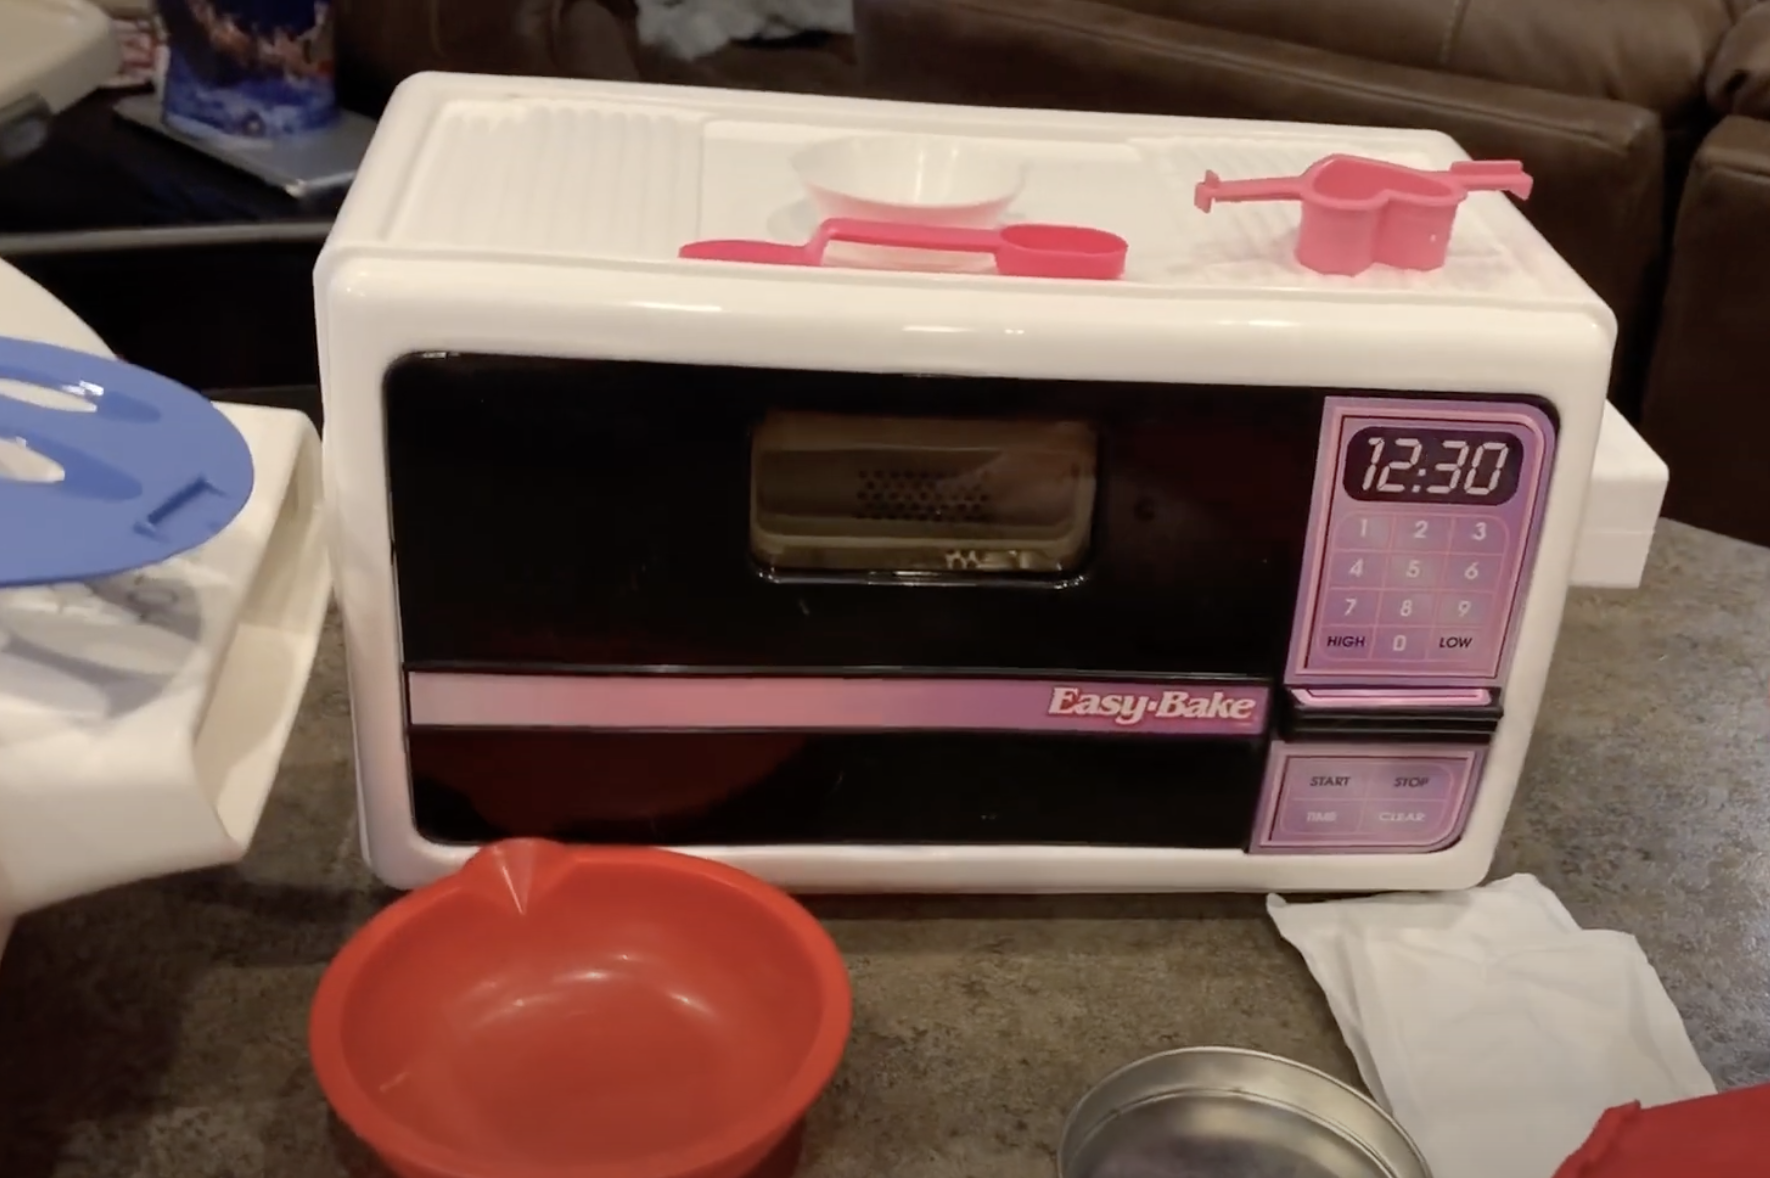 Most Popular Toys of the 90s: Easy-Bake Oven